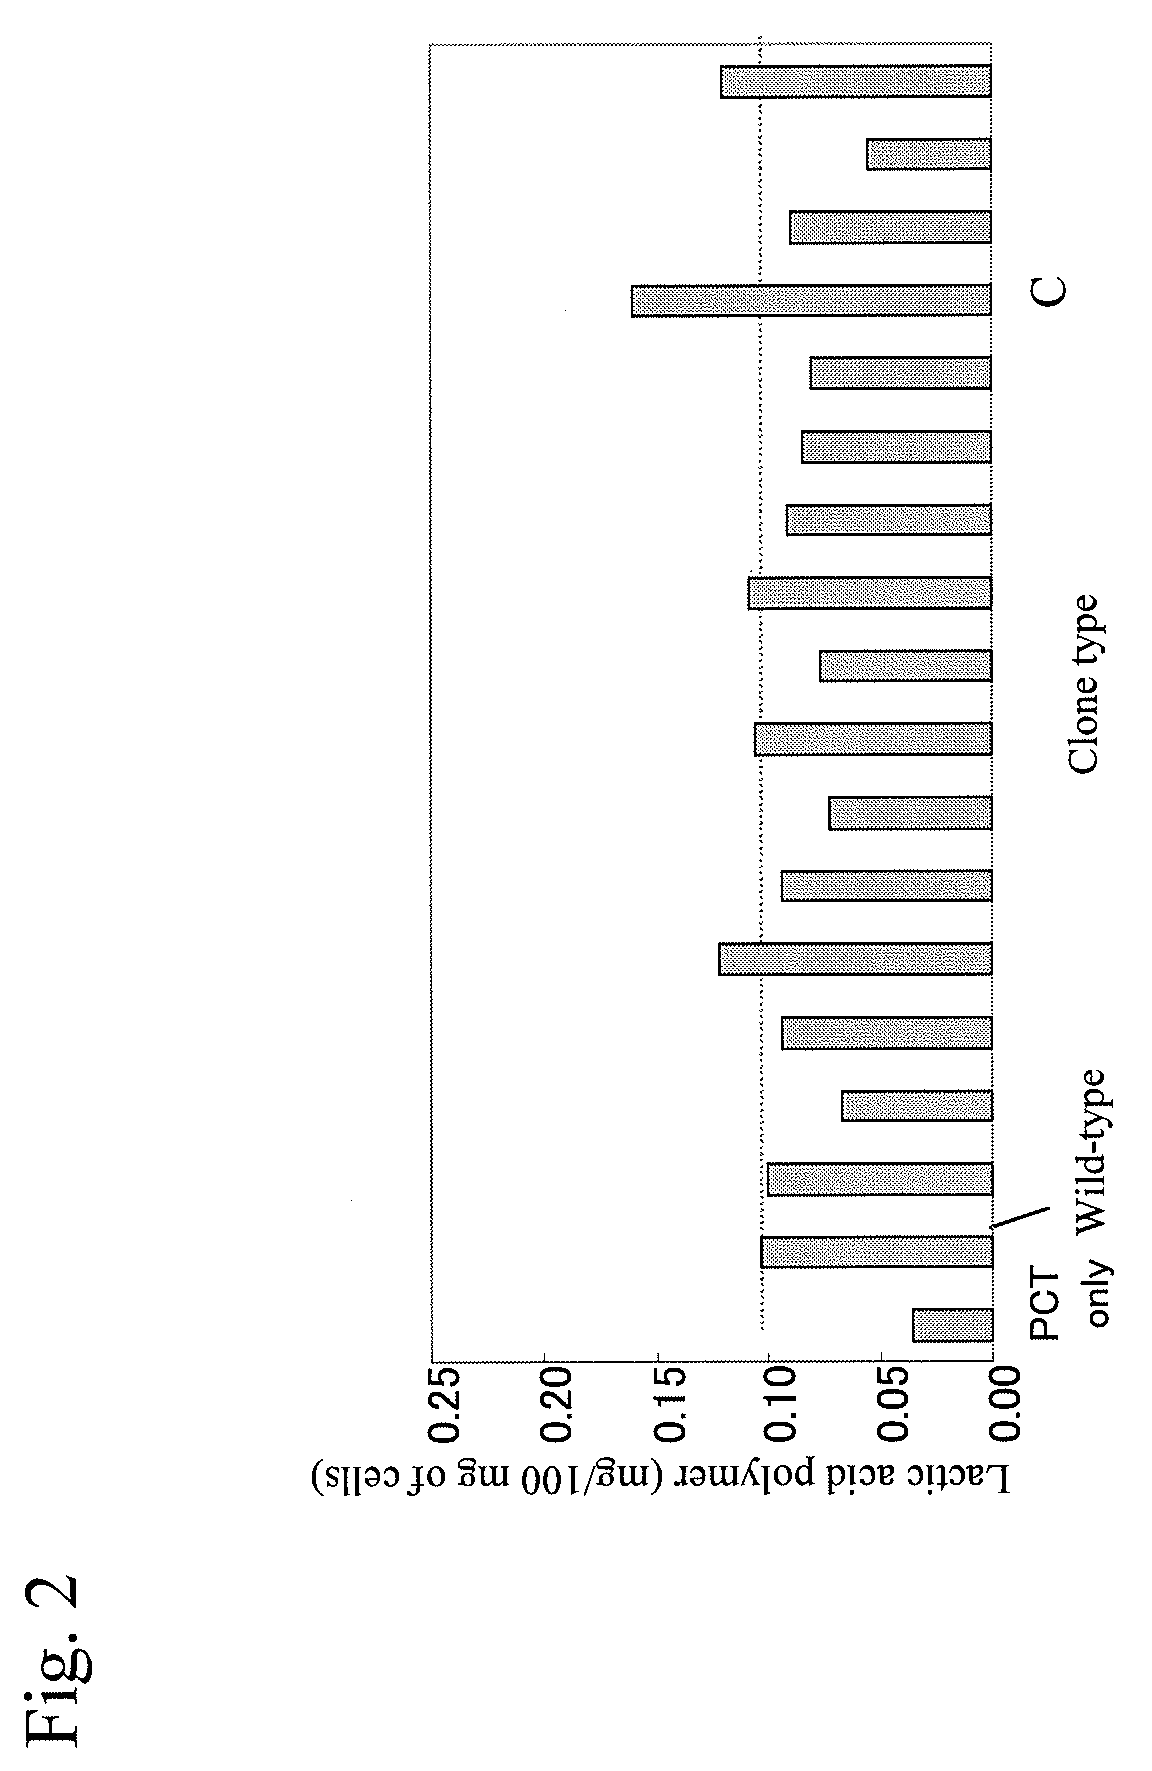 Mutant polyhydroxyalkanoic acid synthase gene and method for producing aliphatic polyester using the same